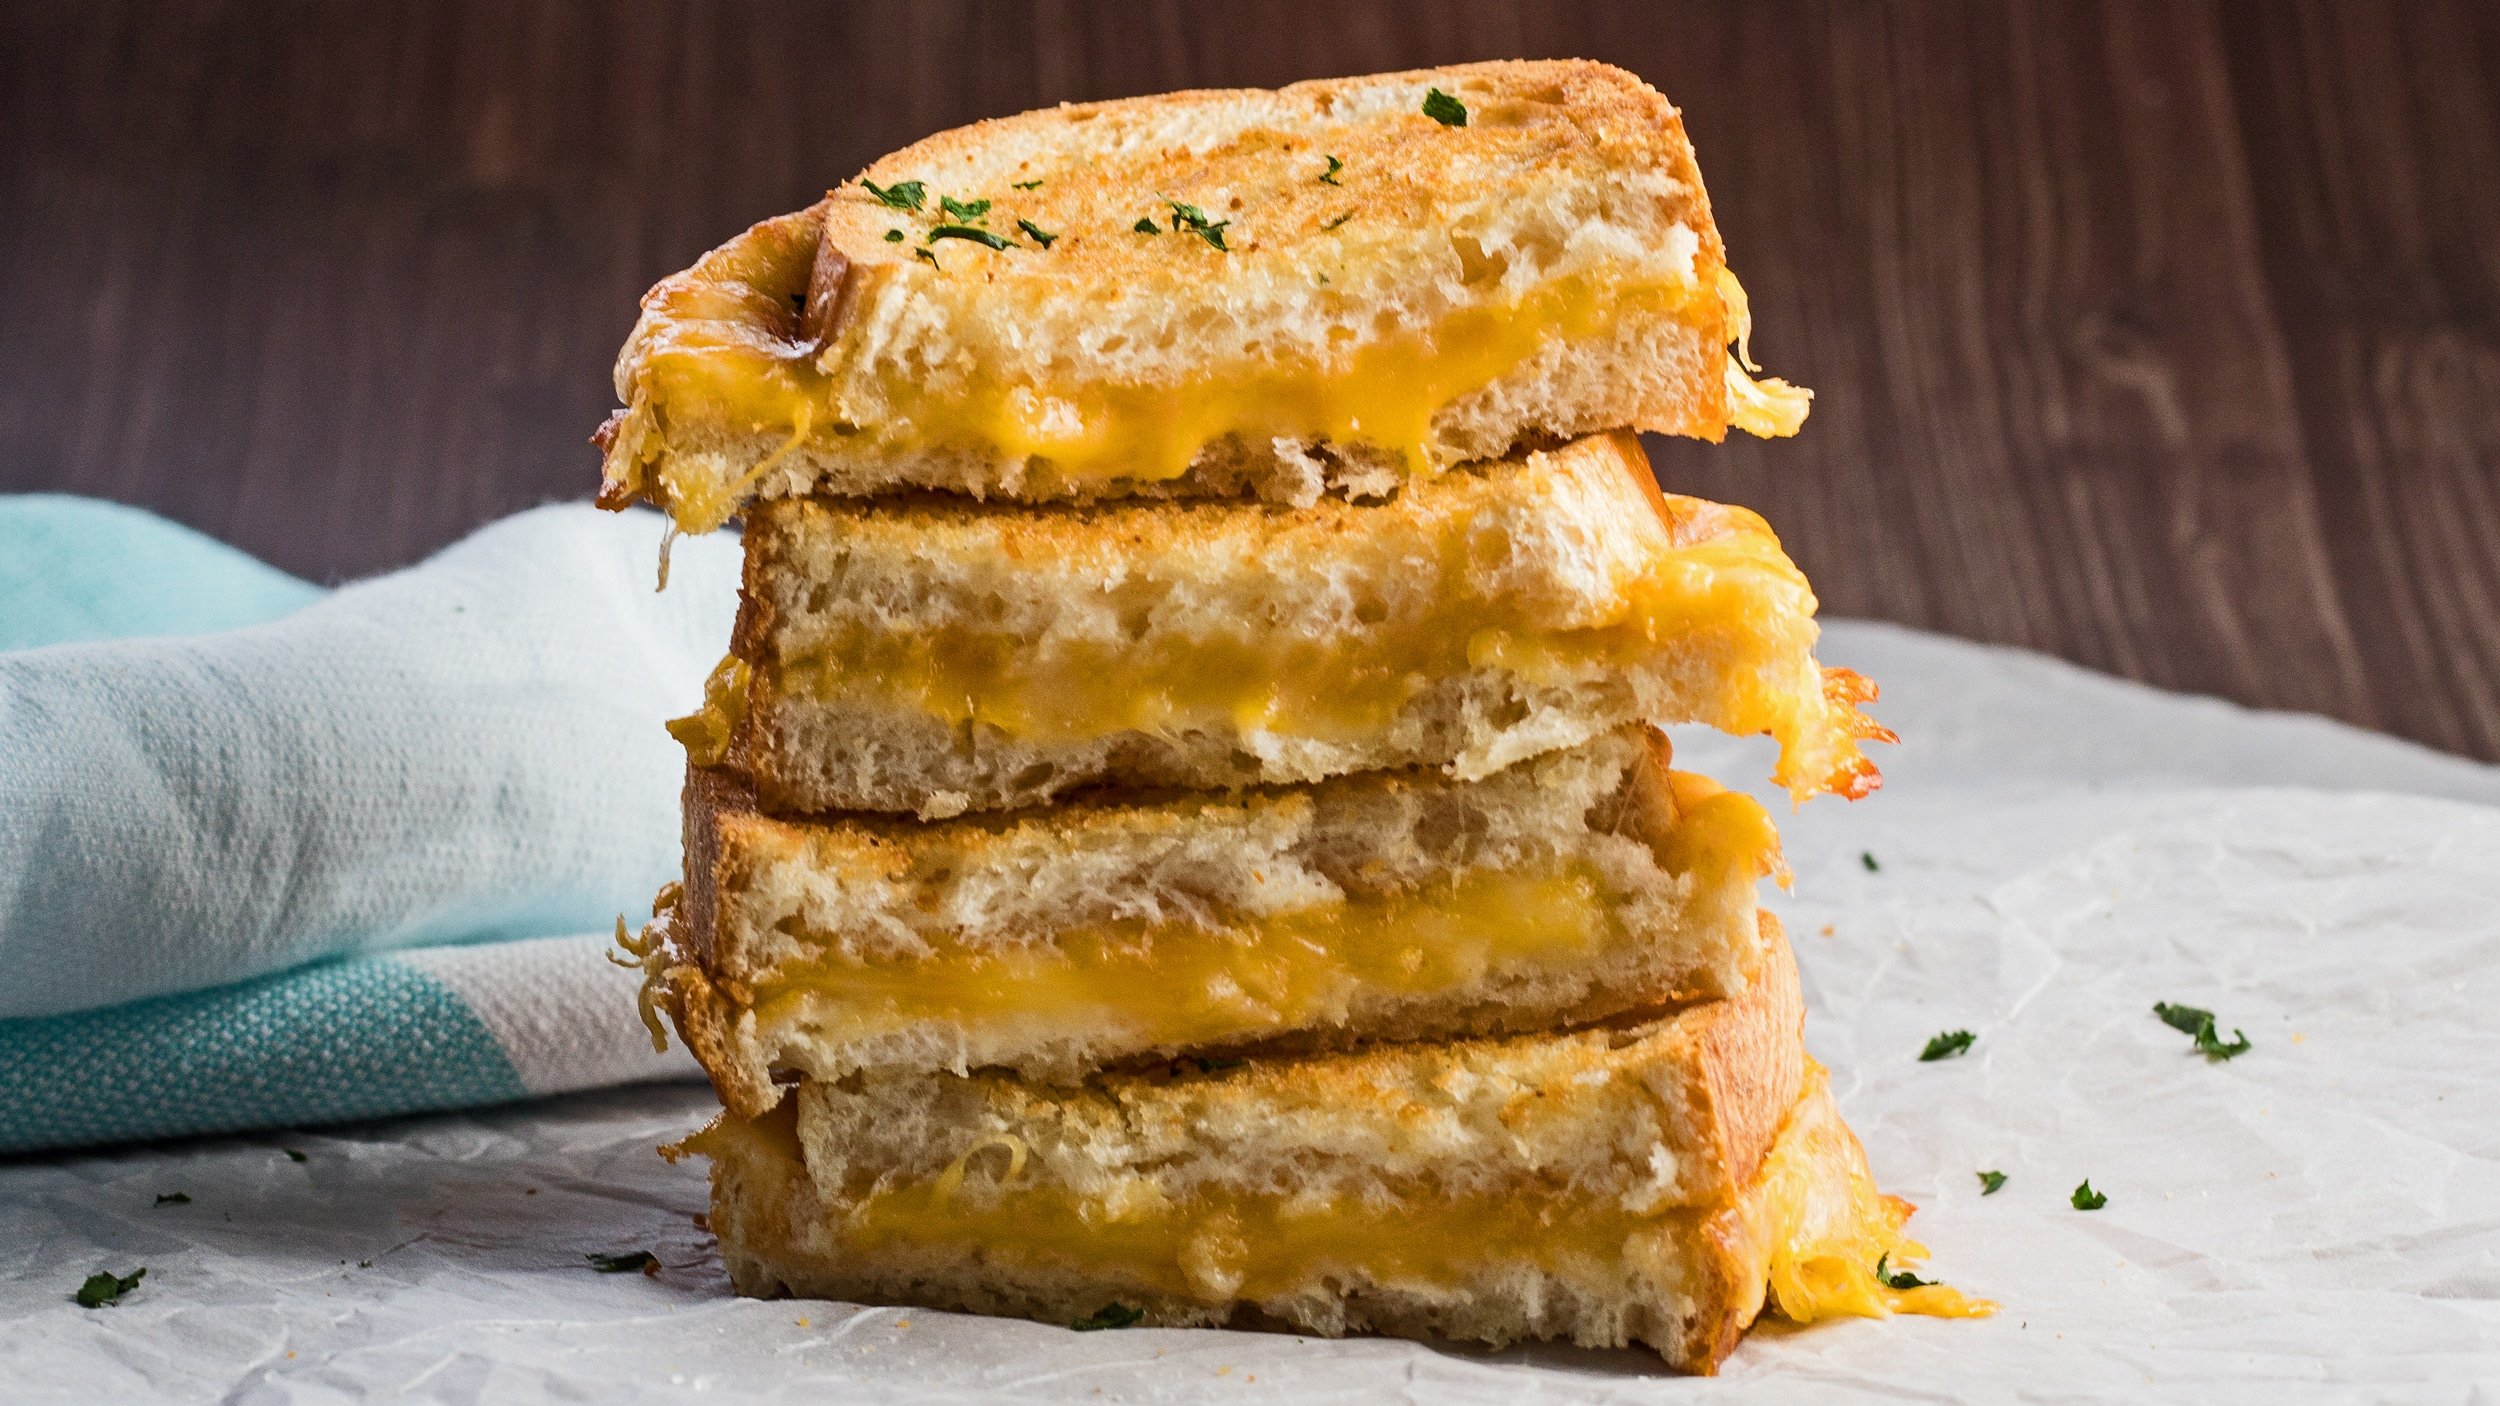 https://bakeitwithlove.com/wp-content/uploads/2020/09/Air-Fryer-Grilled-Cheese-h.jpg